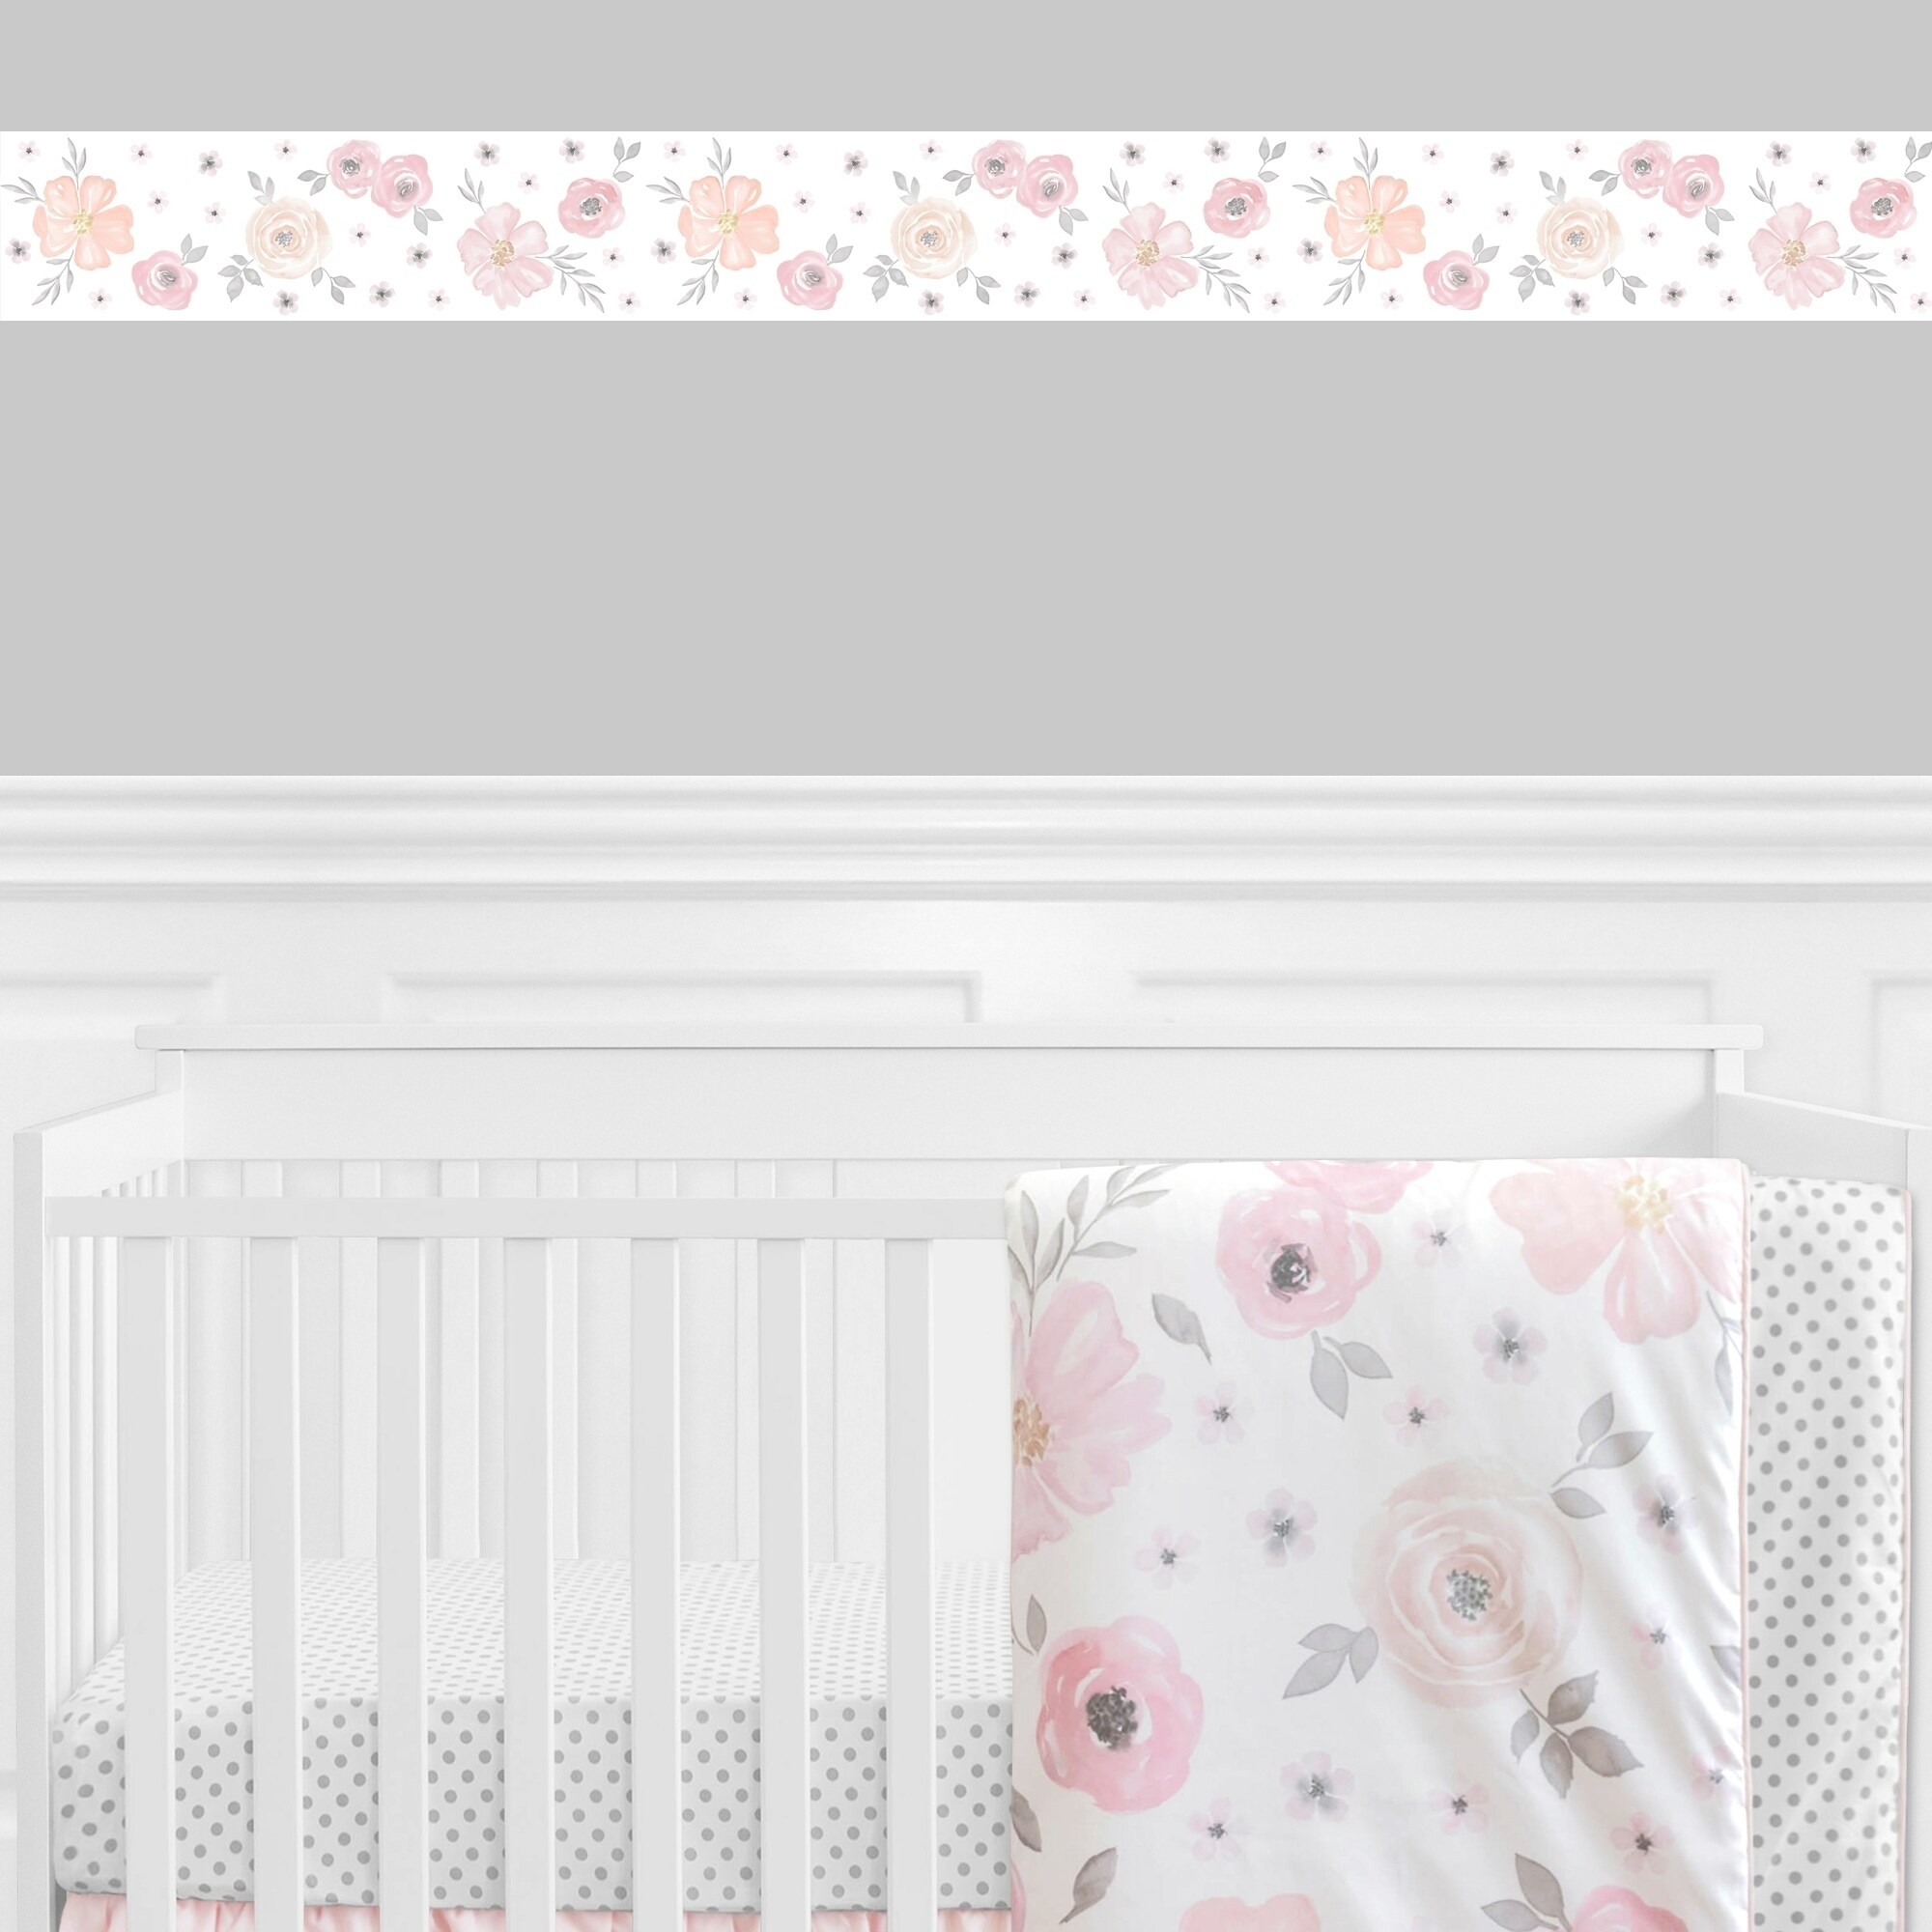 Sweet Jojo Designs Wall Paper Border for the Pink and Grey Watercolor  Floral Collection Bed Bath  Beyond 20311097